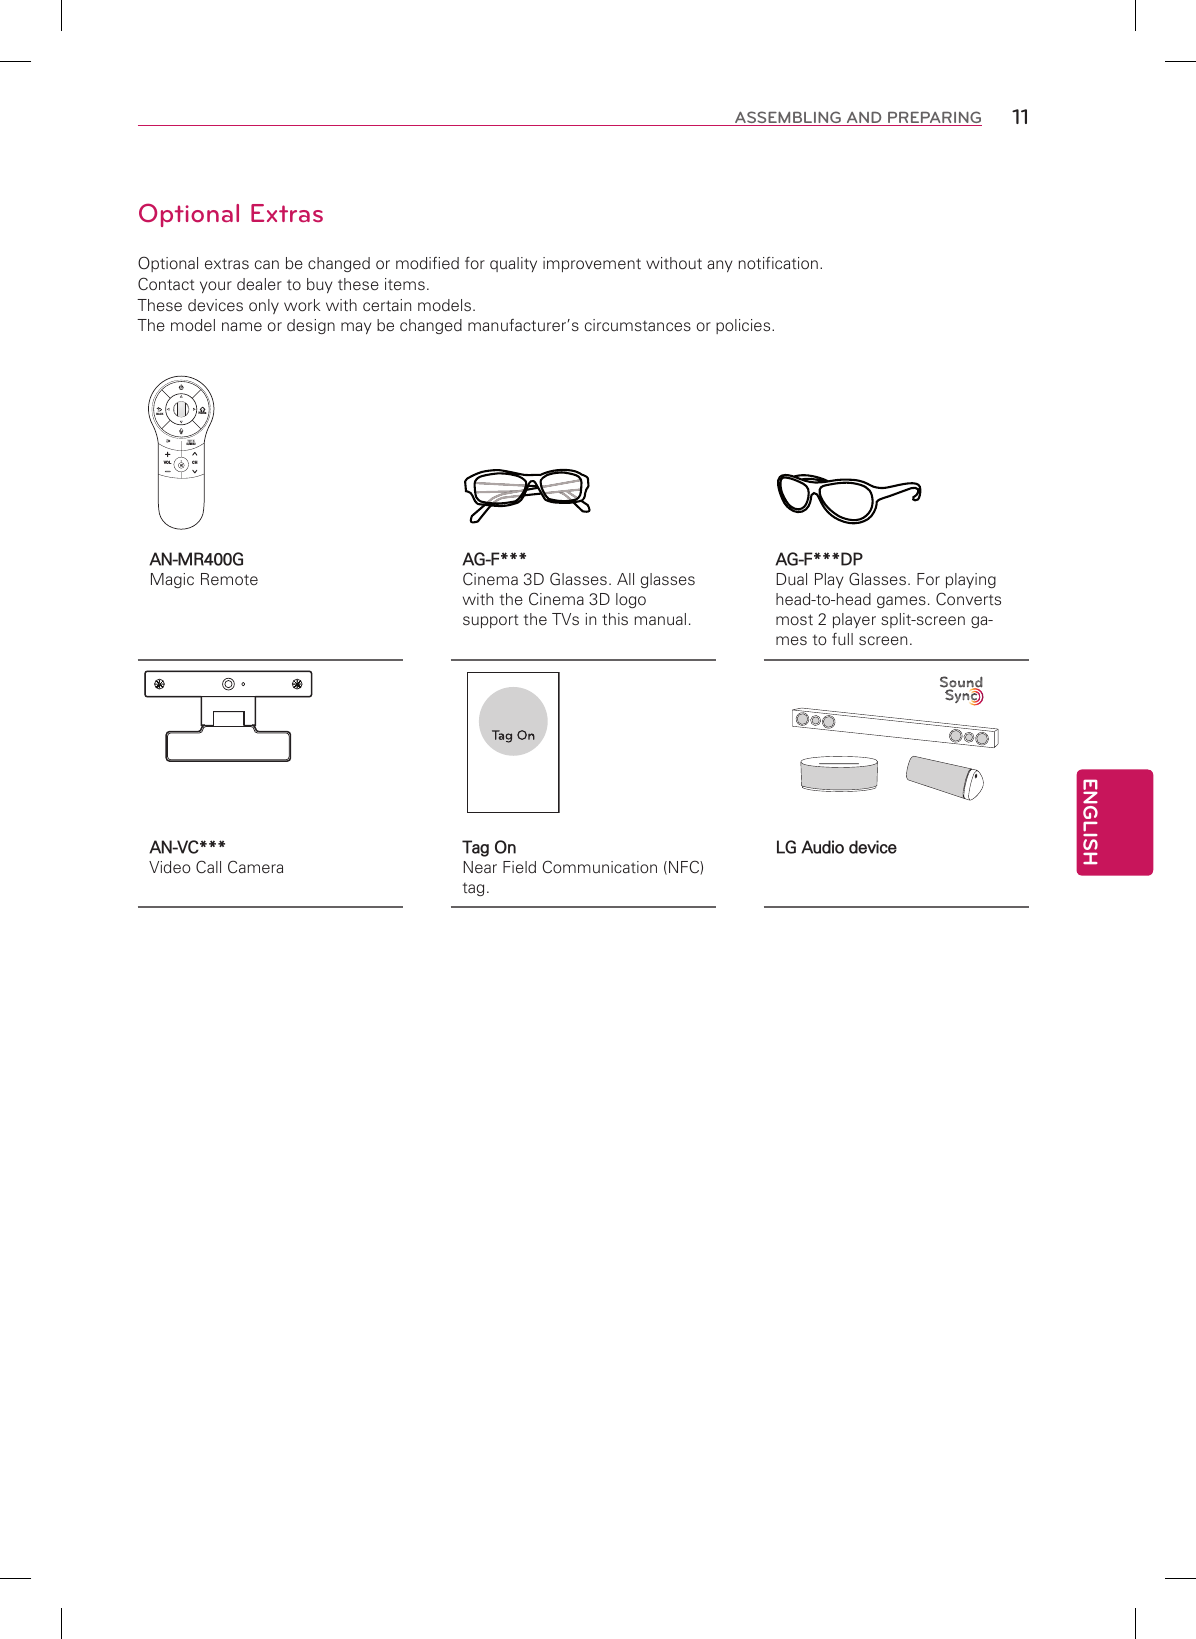 ENGLISH11ASSEMBLING AND PREPARINGOptional ExtrasOptional extras can be changed or modified for quality improvement without any notification.Contact your dealer to buy these items.These devices only work with certain models.The model name or design may be changed manufacturer’s circumstances or policies.AN-MR400G Magic RemoteAG-F***Cinema 3D Glasses. All glasses with the Cinema 3D logo support the TVs in this manual.AG-F***DPDual Play Glasses. For playing head-to-head games. Converts most 2 player split-screen ga-mes to full screen.AN-VC*** Video Call CameraTag OnNear Field Communication (NFC) tag.LG Audio deviceCHVOL/Q.MENUBACK Home